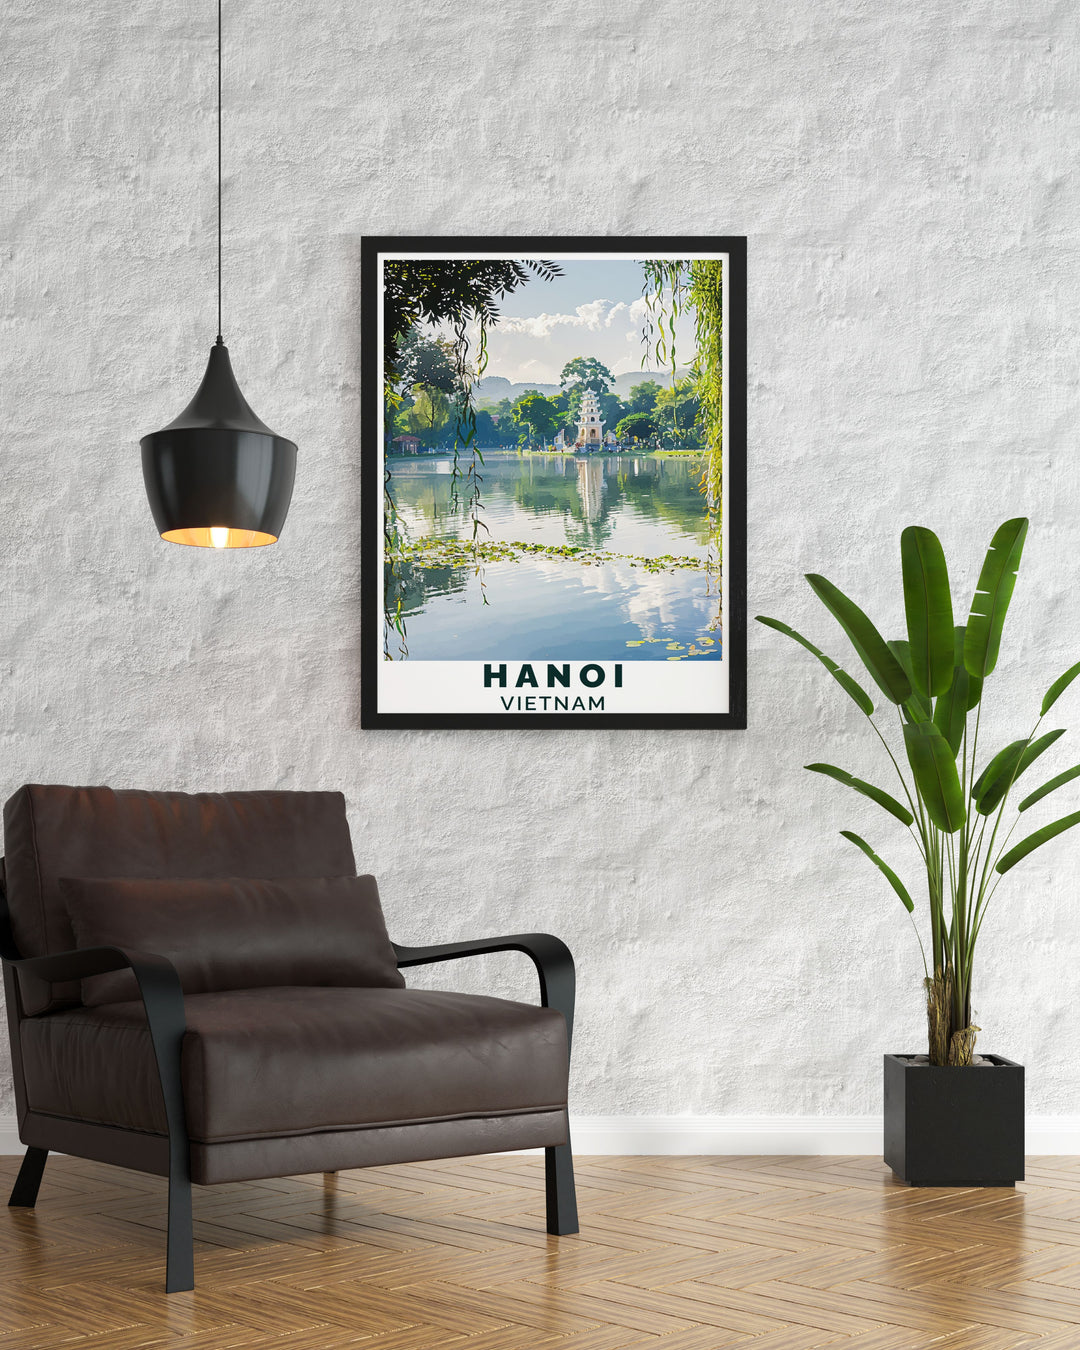 Showcasing the peaceful charm of Hoan Kiem Lake, this travel poster brings the rich cultural heritage of Hanoi into your living space.